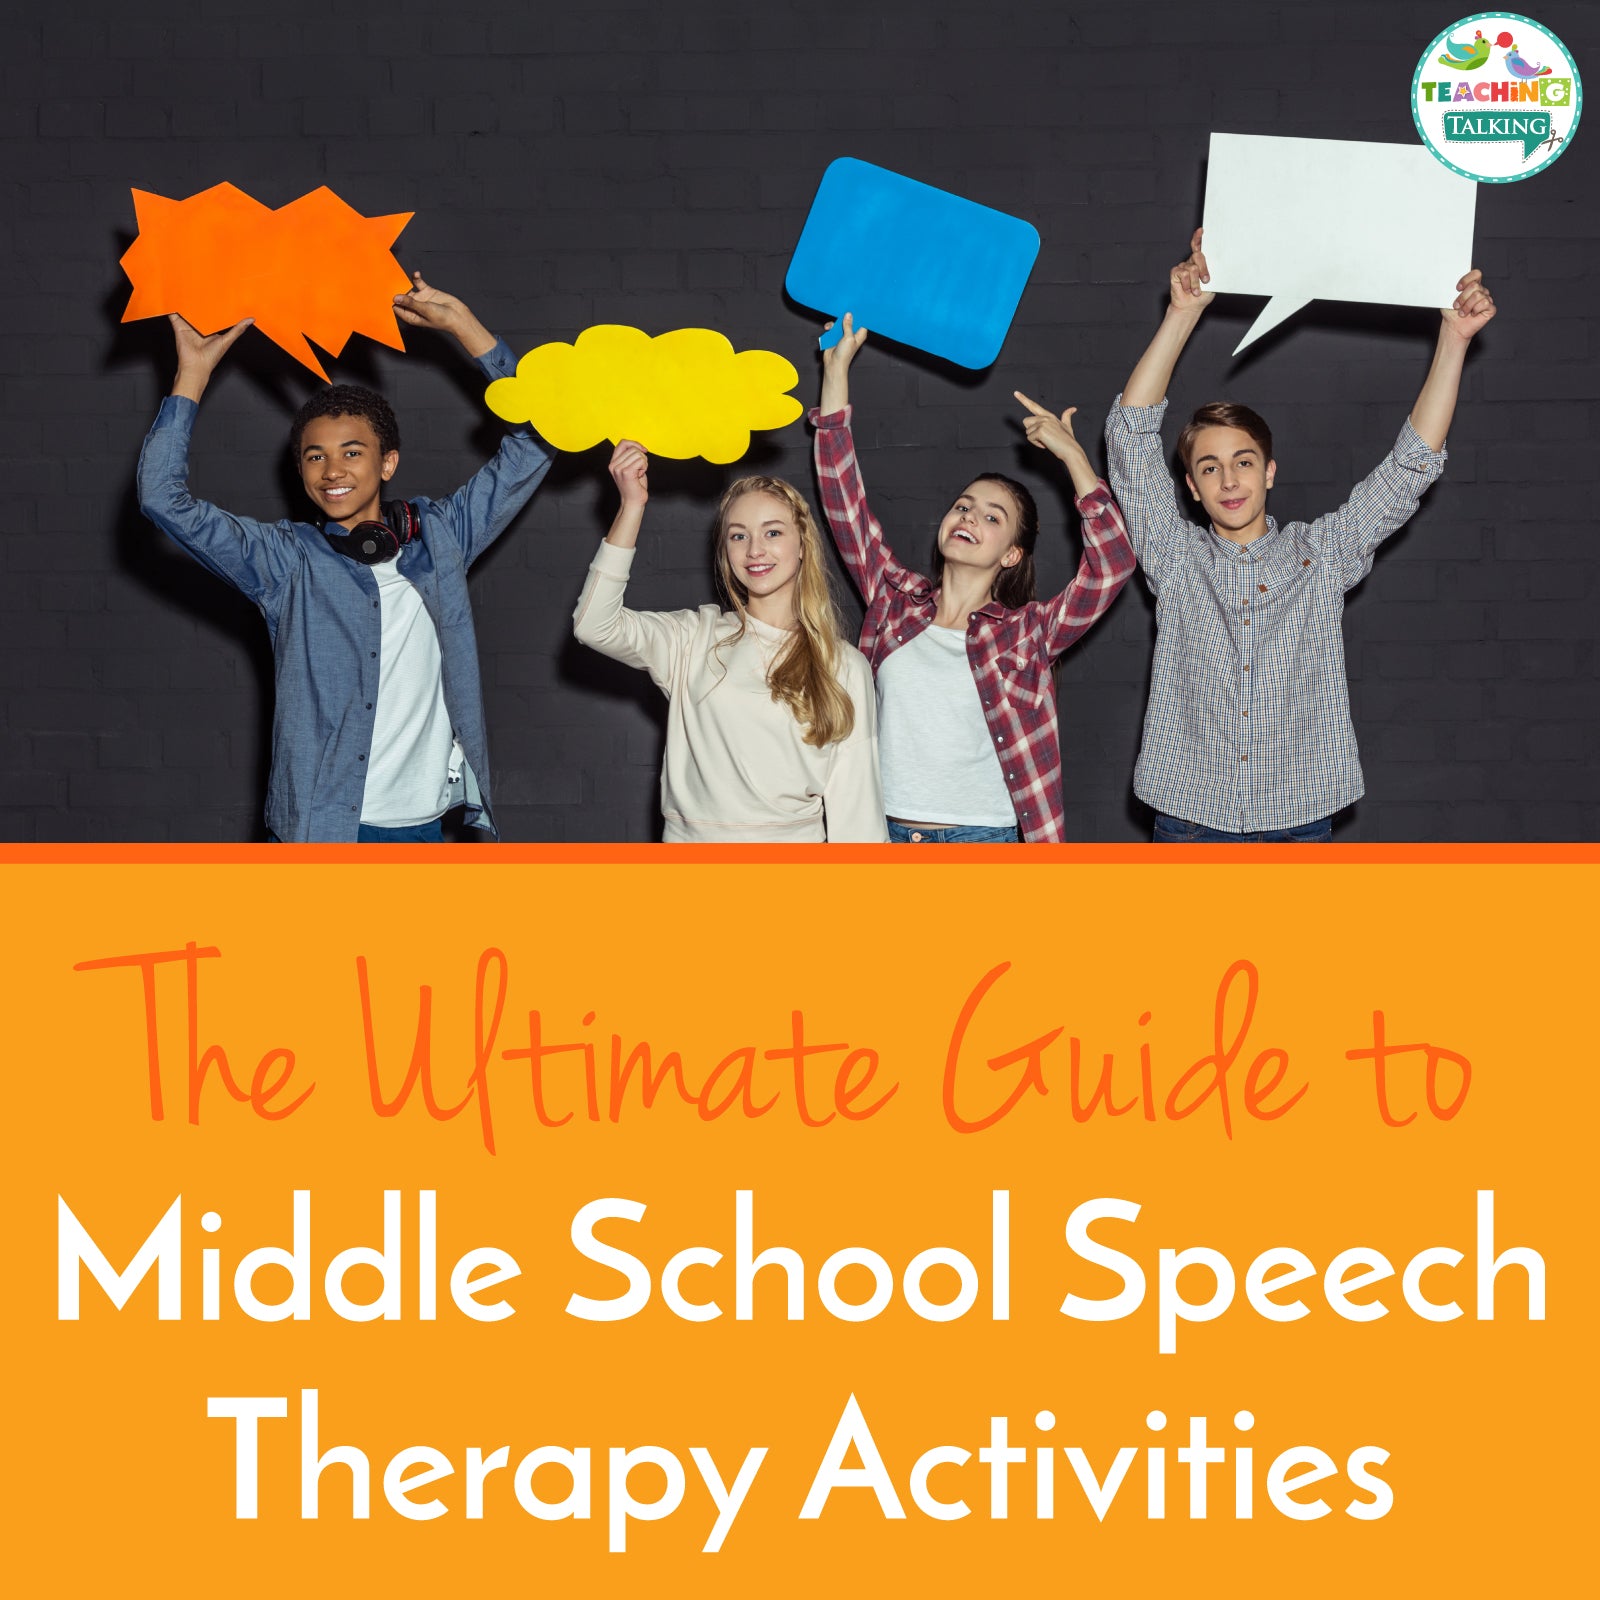 The Ultimate Guide to Middle School Speech Therapy Activities